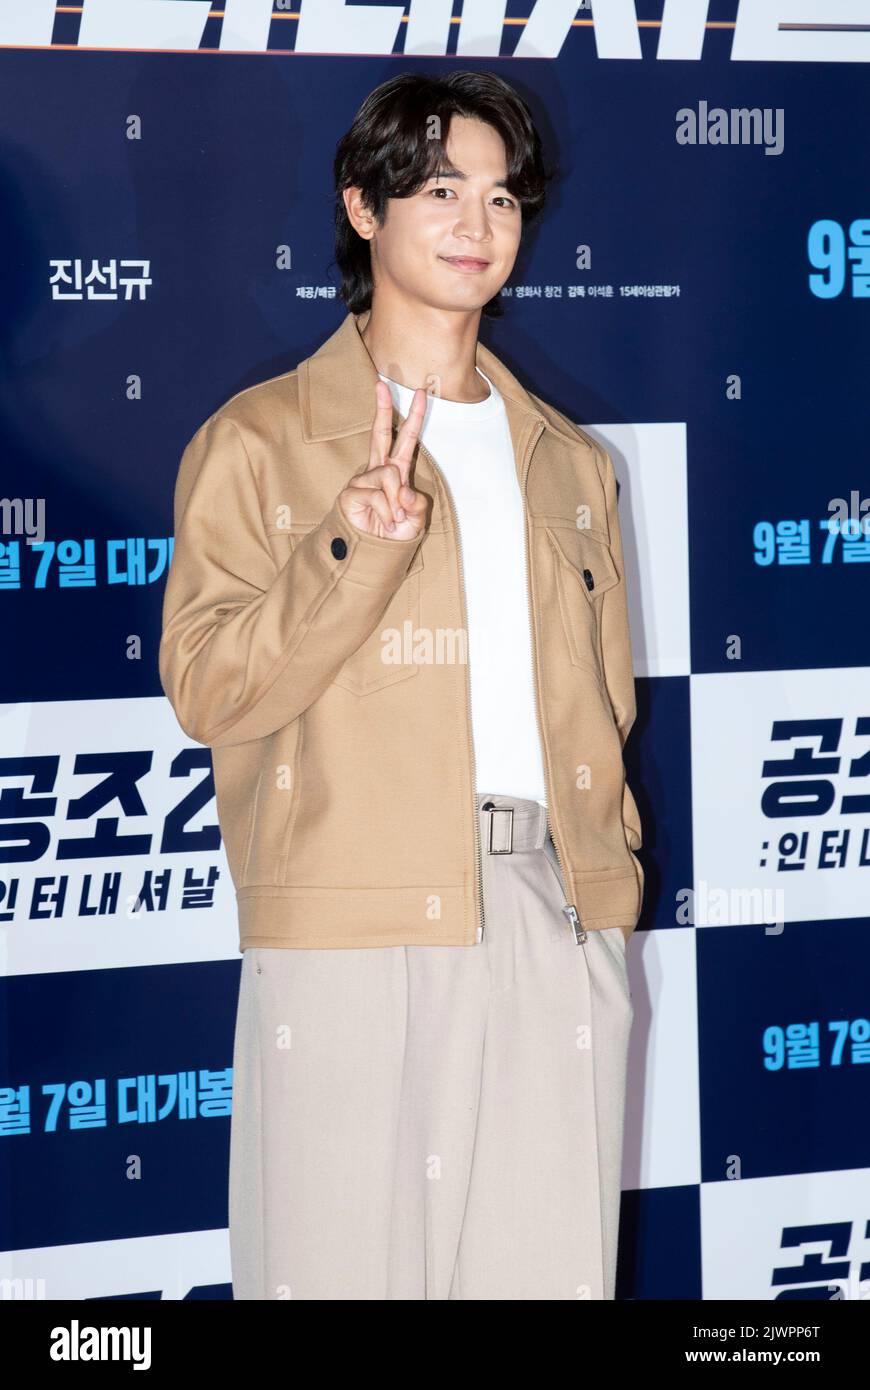 Seoul, South Korea. 6th Sep, 2022. South Korean singer and actor Minho, member of K-Pop boy band CHINee, pose for photos during a premiere of the film 'Confidential Assignment 2: International' in Seoul, South Korea on September 6, 2022. The movie is to be released in South Korea on September 7. (Photo by Lee Young-ho/Sipa USA) Credit: Sipa USA/Alamy Live News Stock Photo